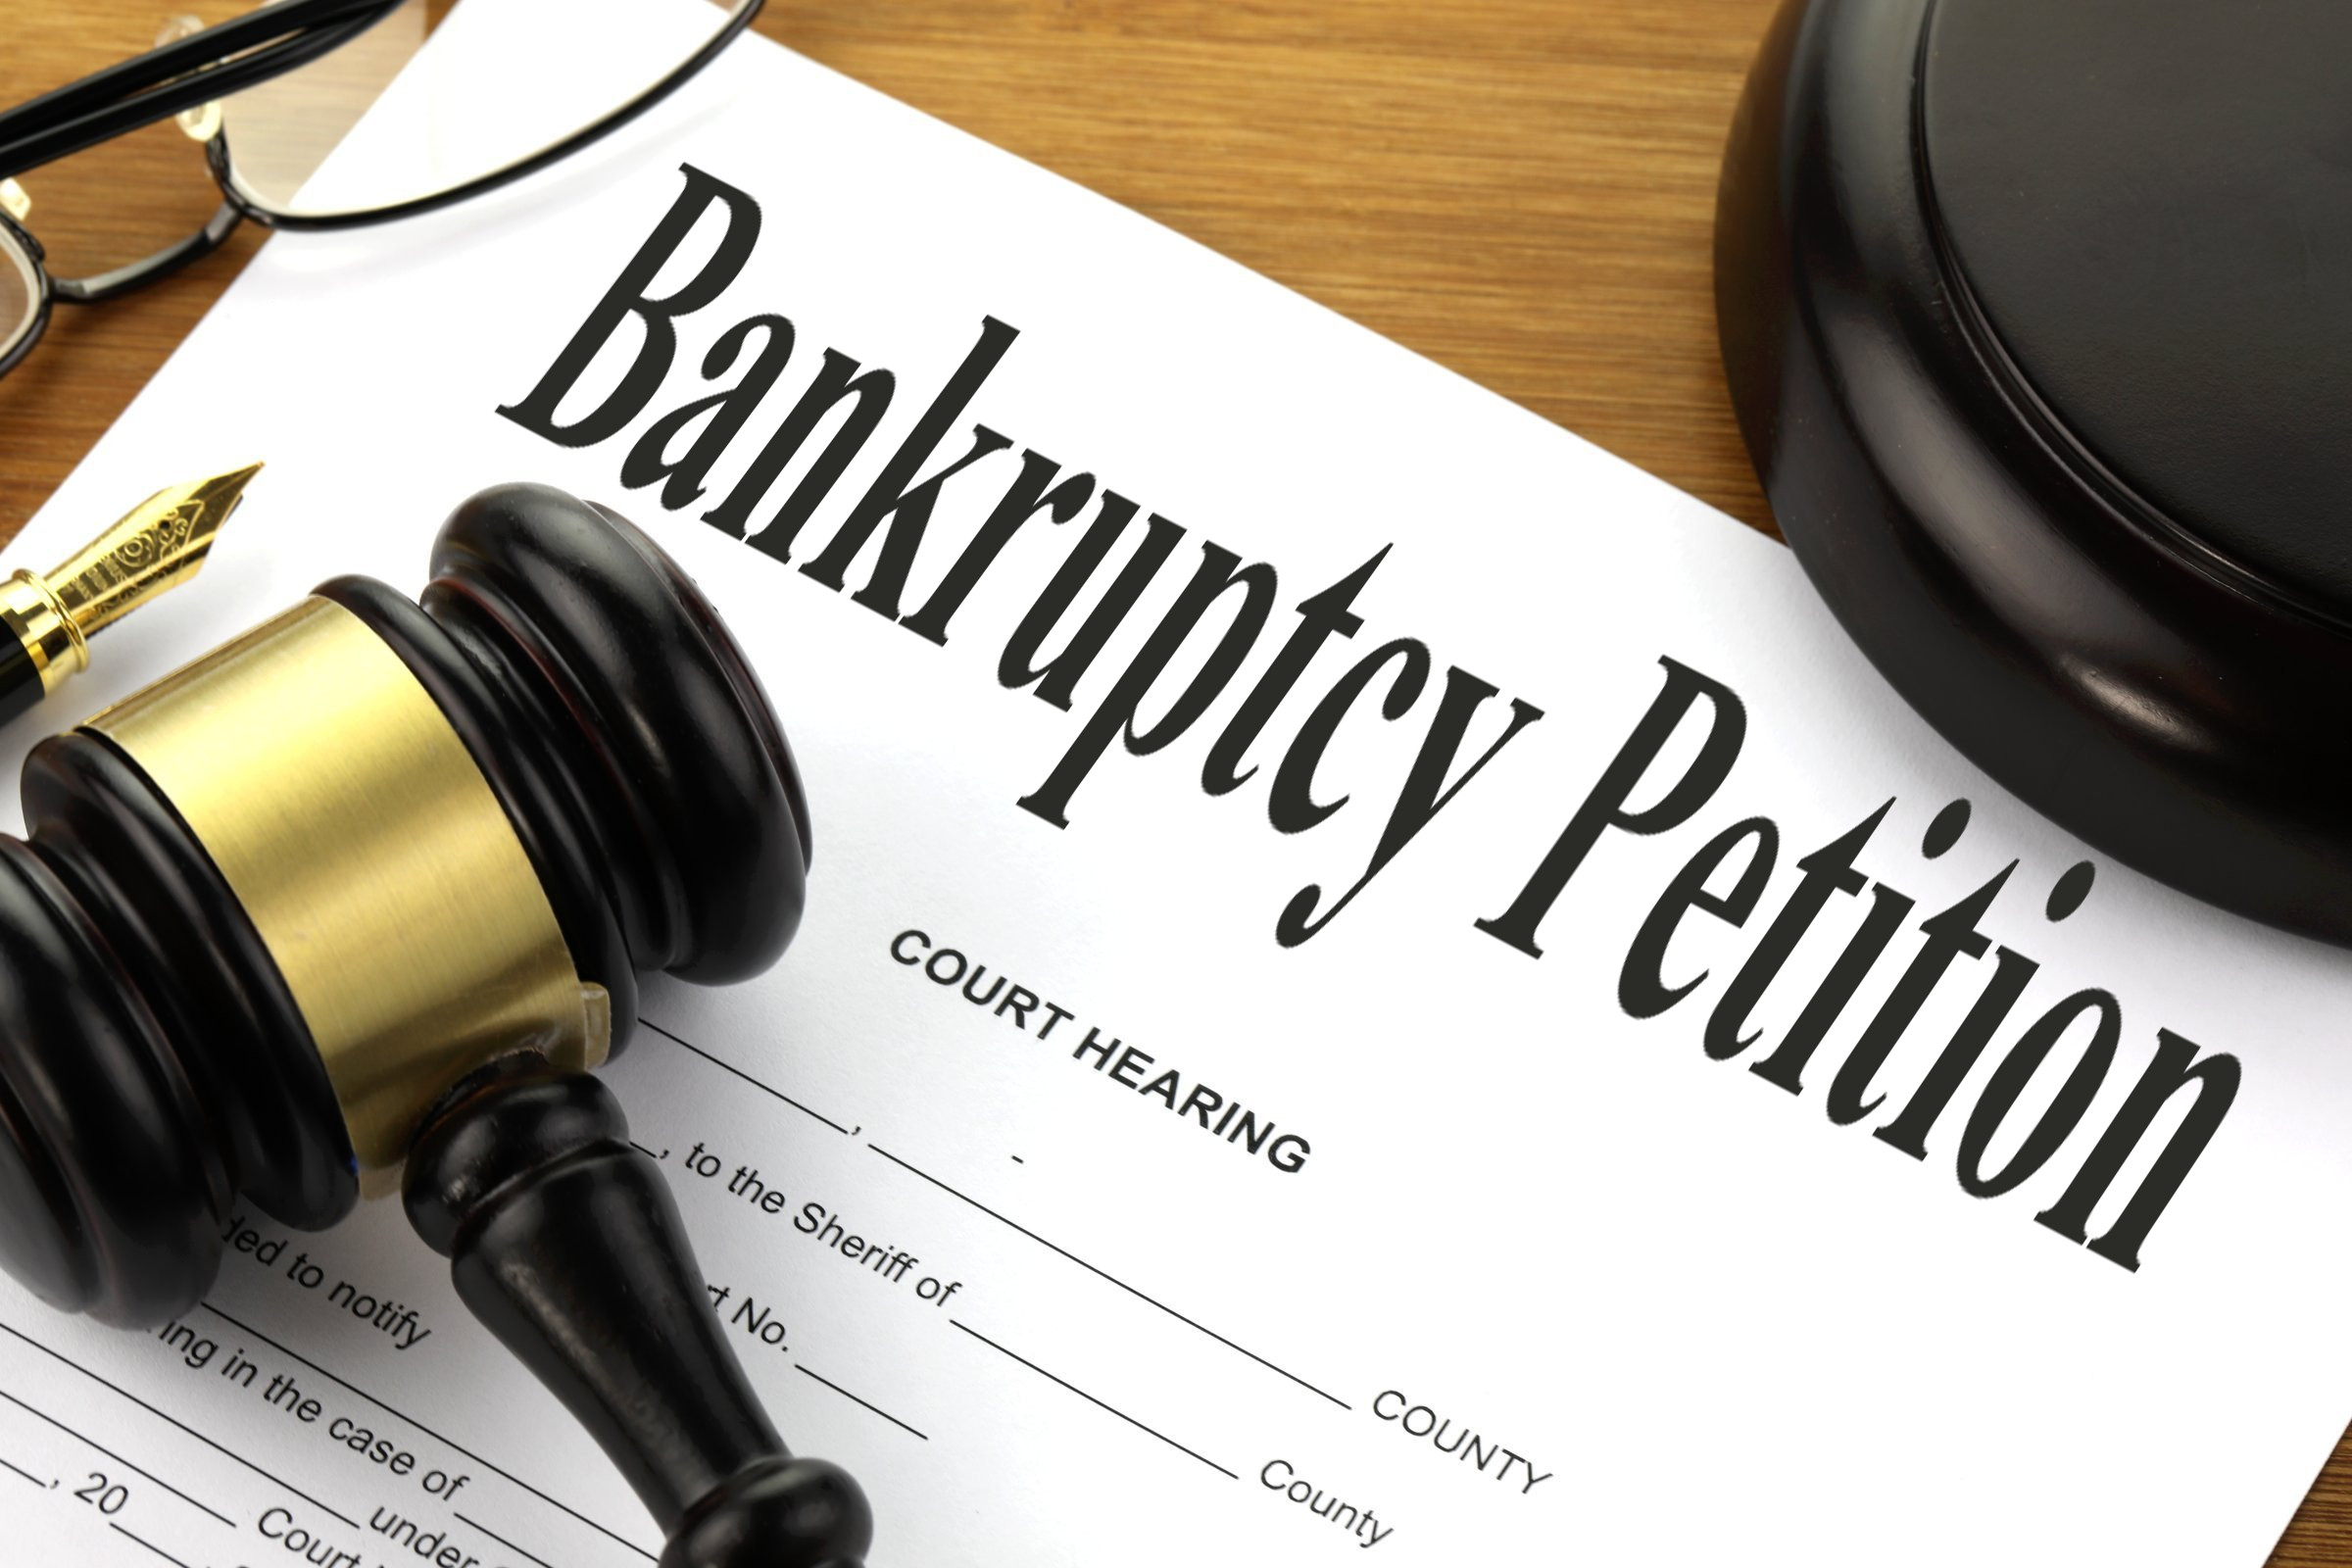 bankruptcy petition